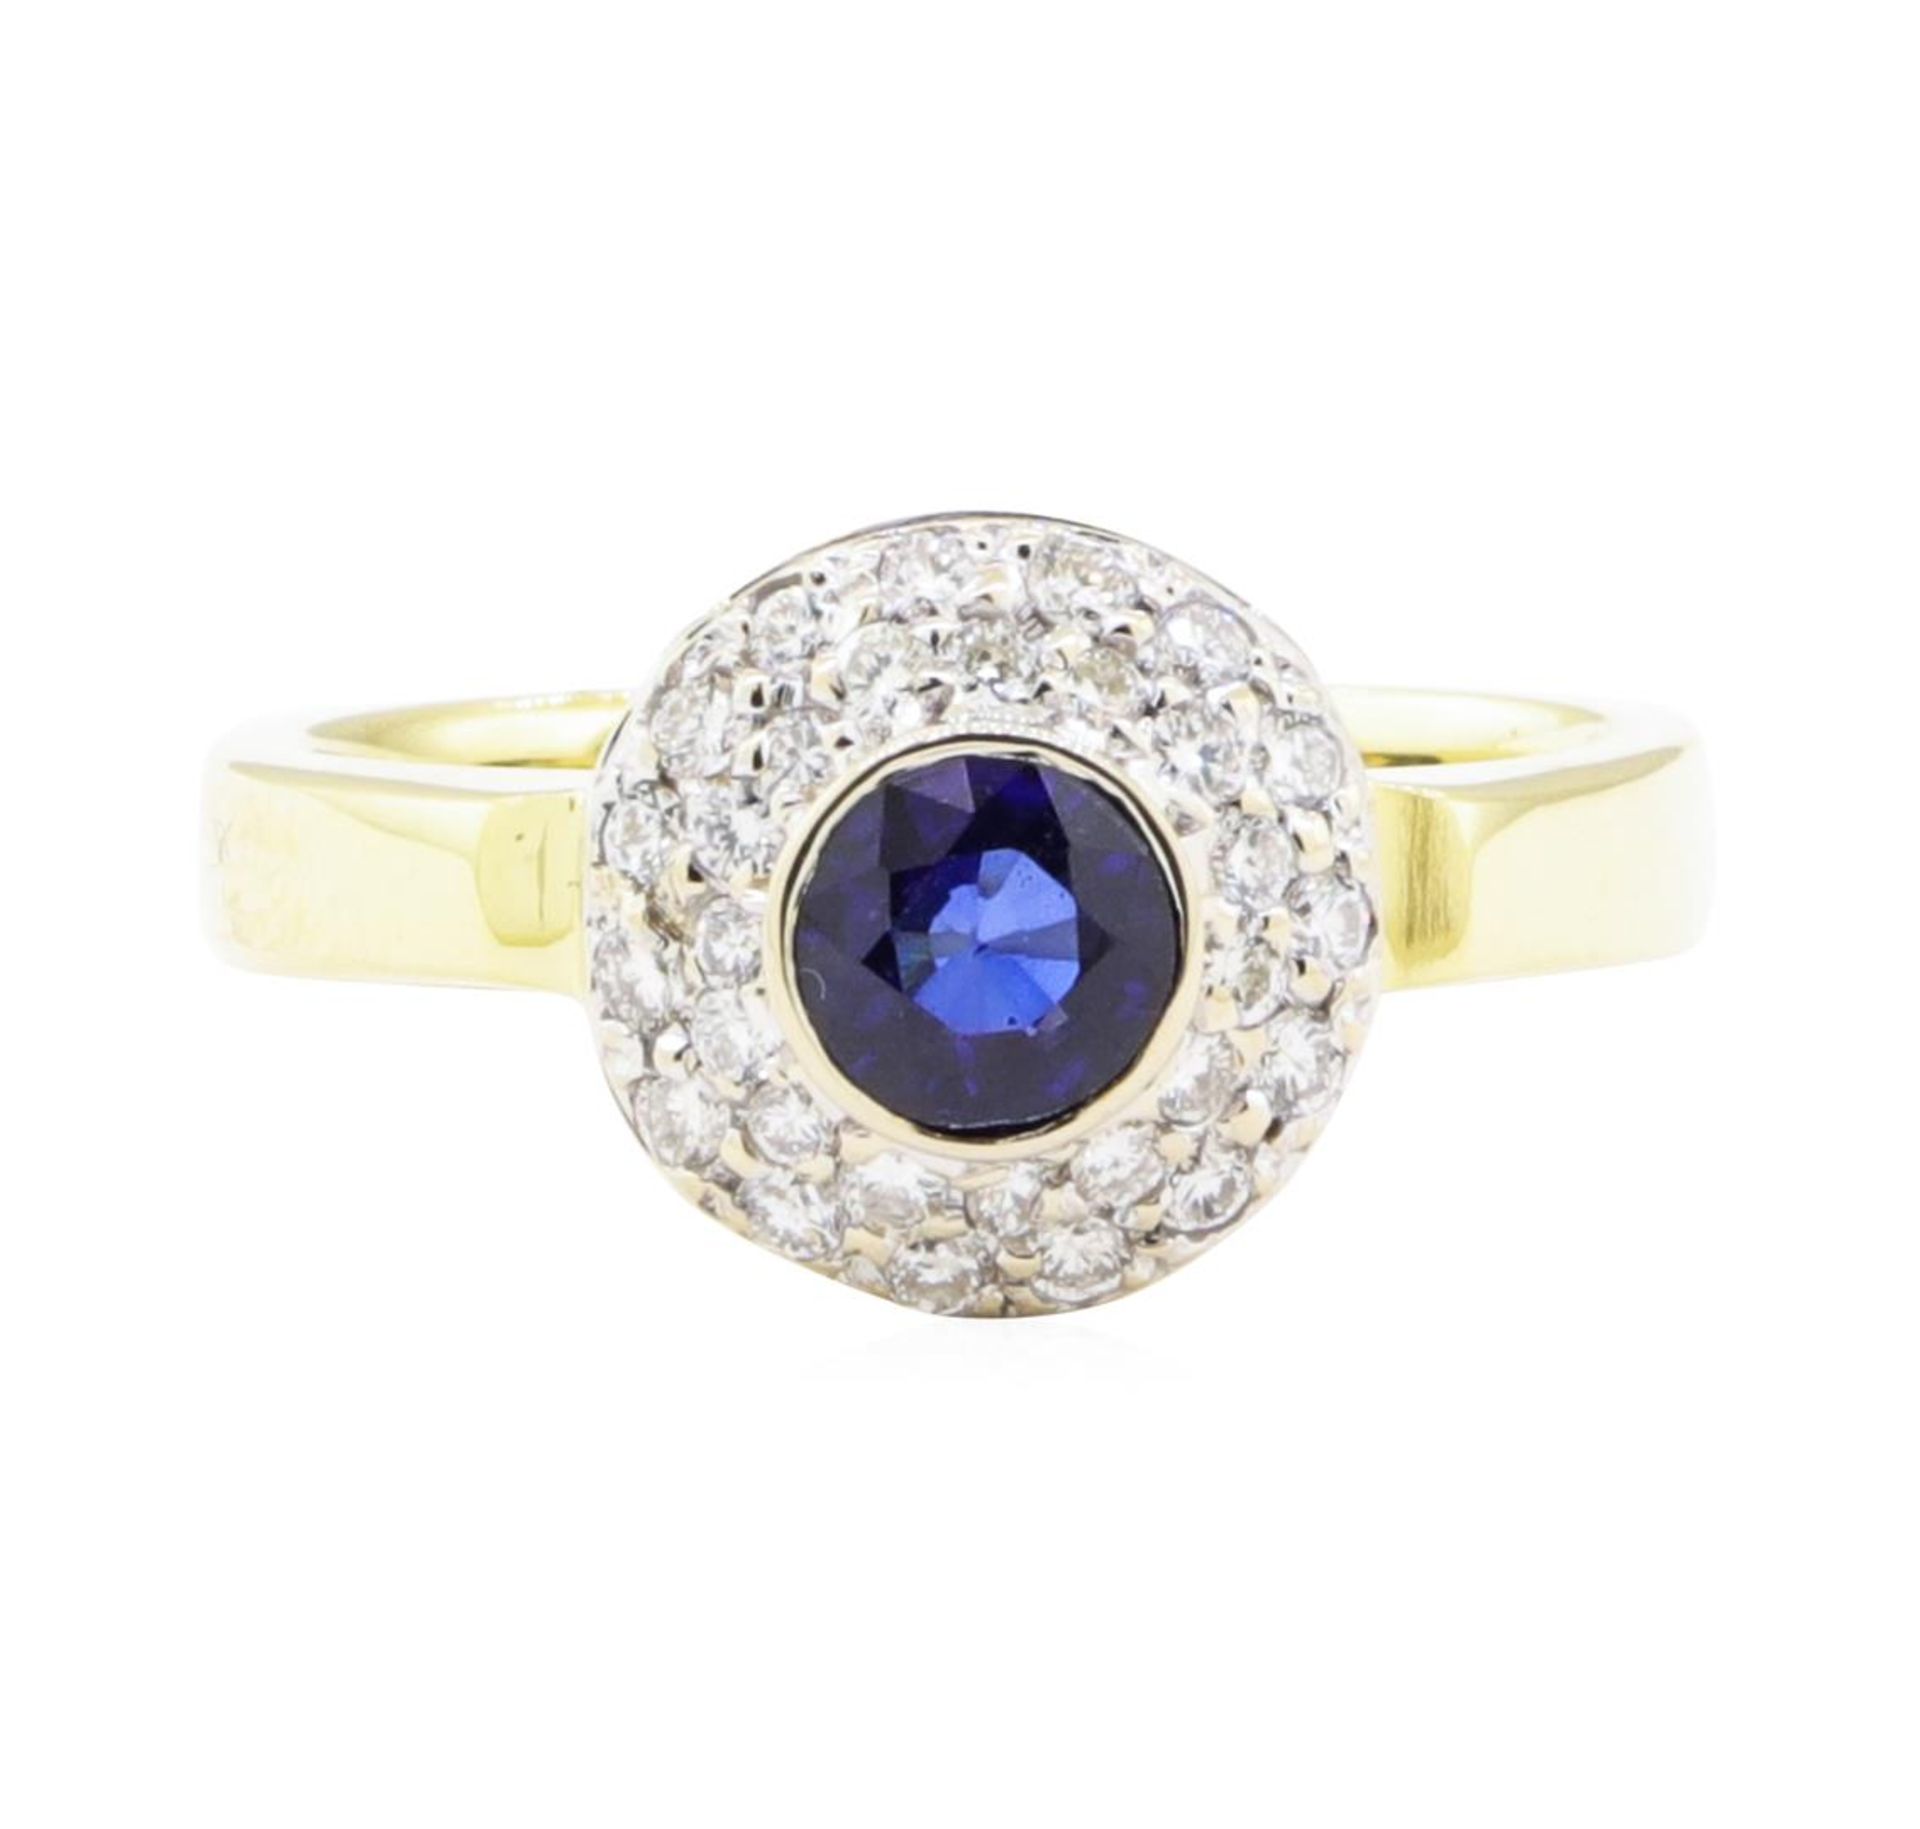 1.02 ctw Sapphire and Diamond Ring - 18KT Yellow Gold - Image 2 of 4